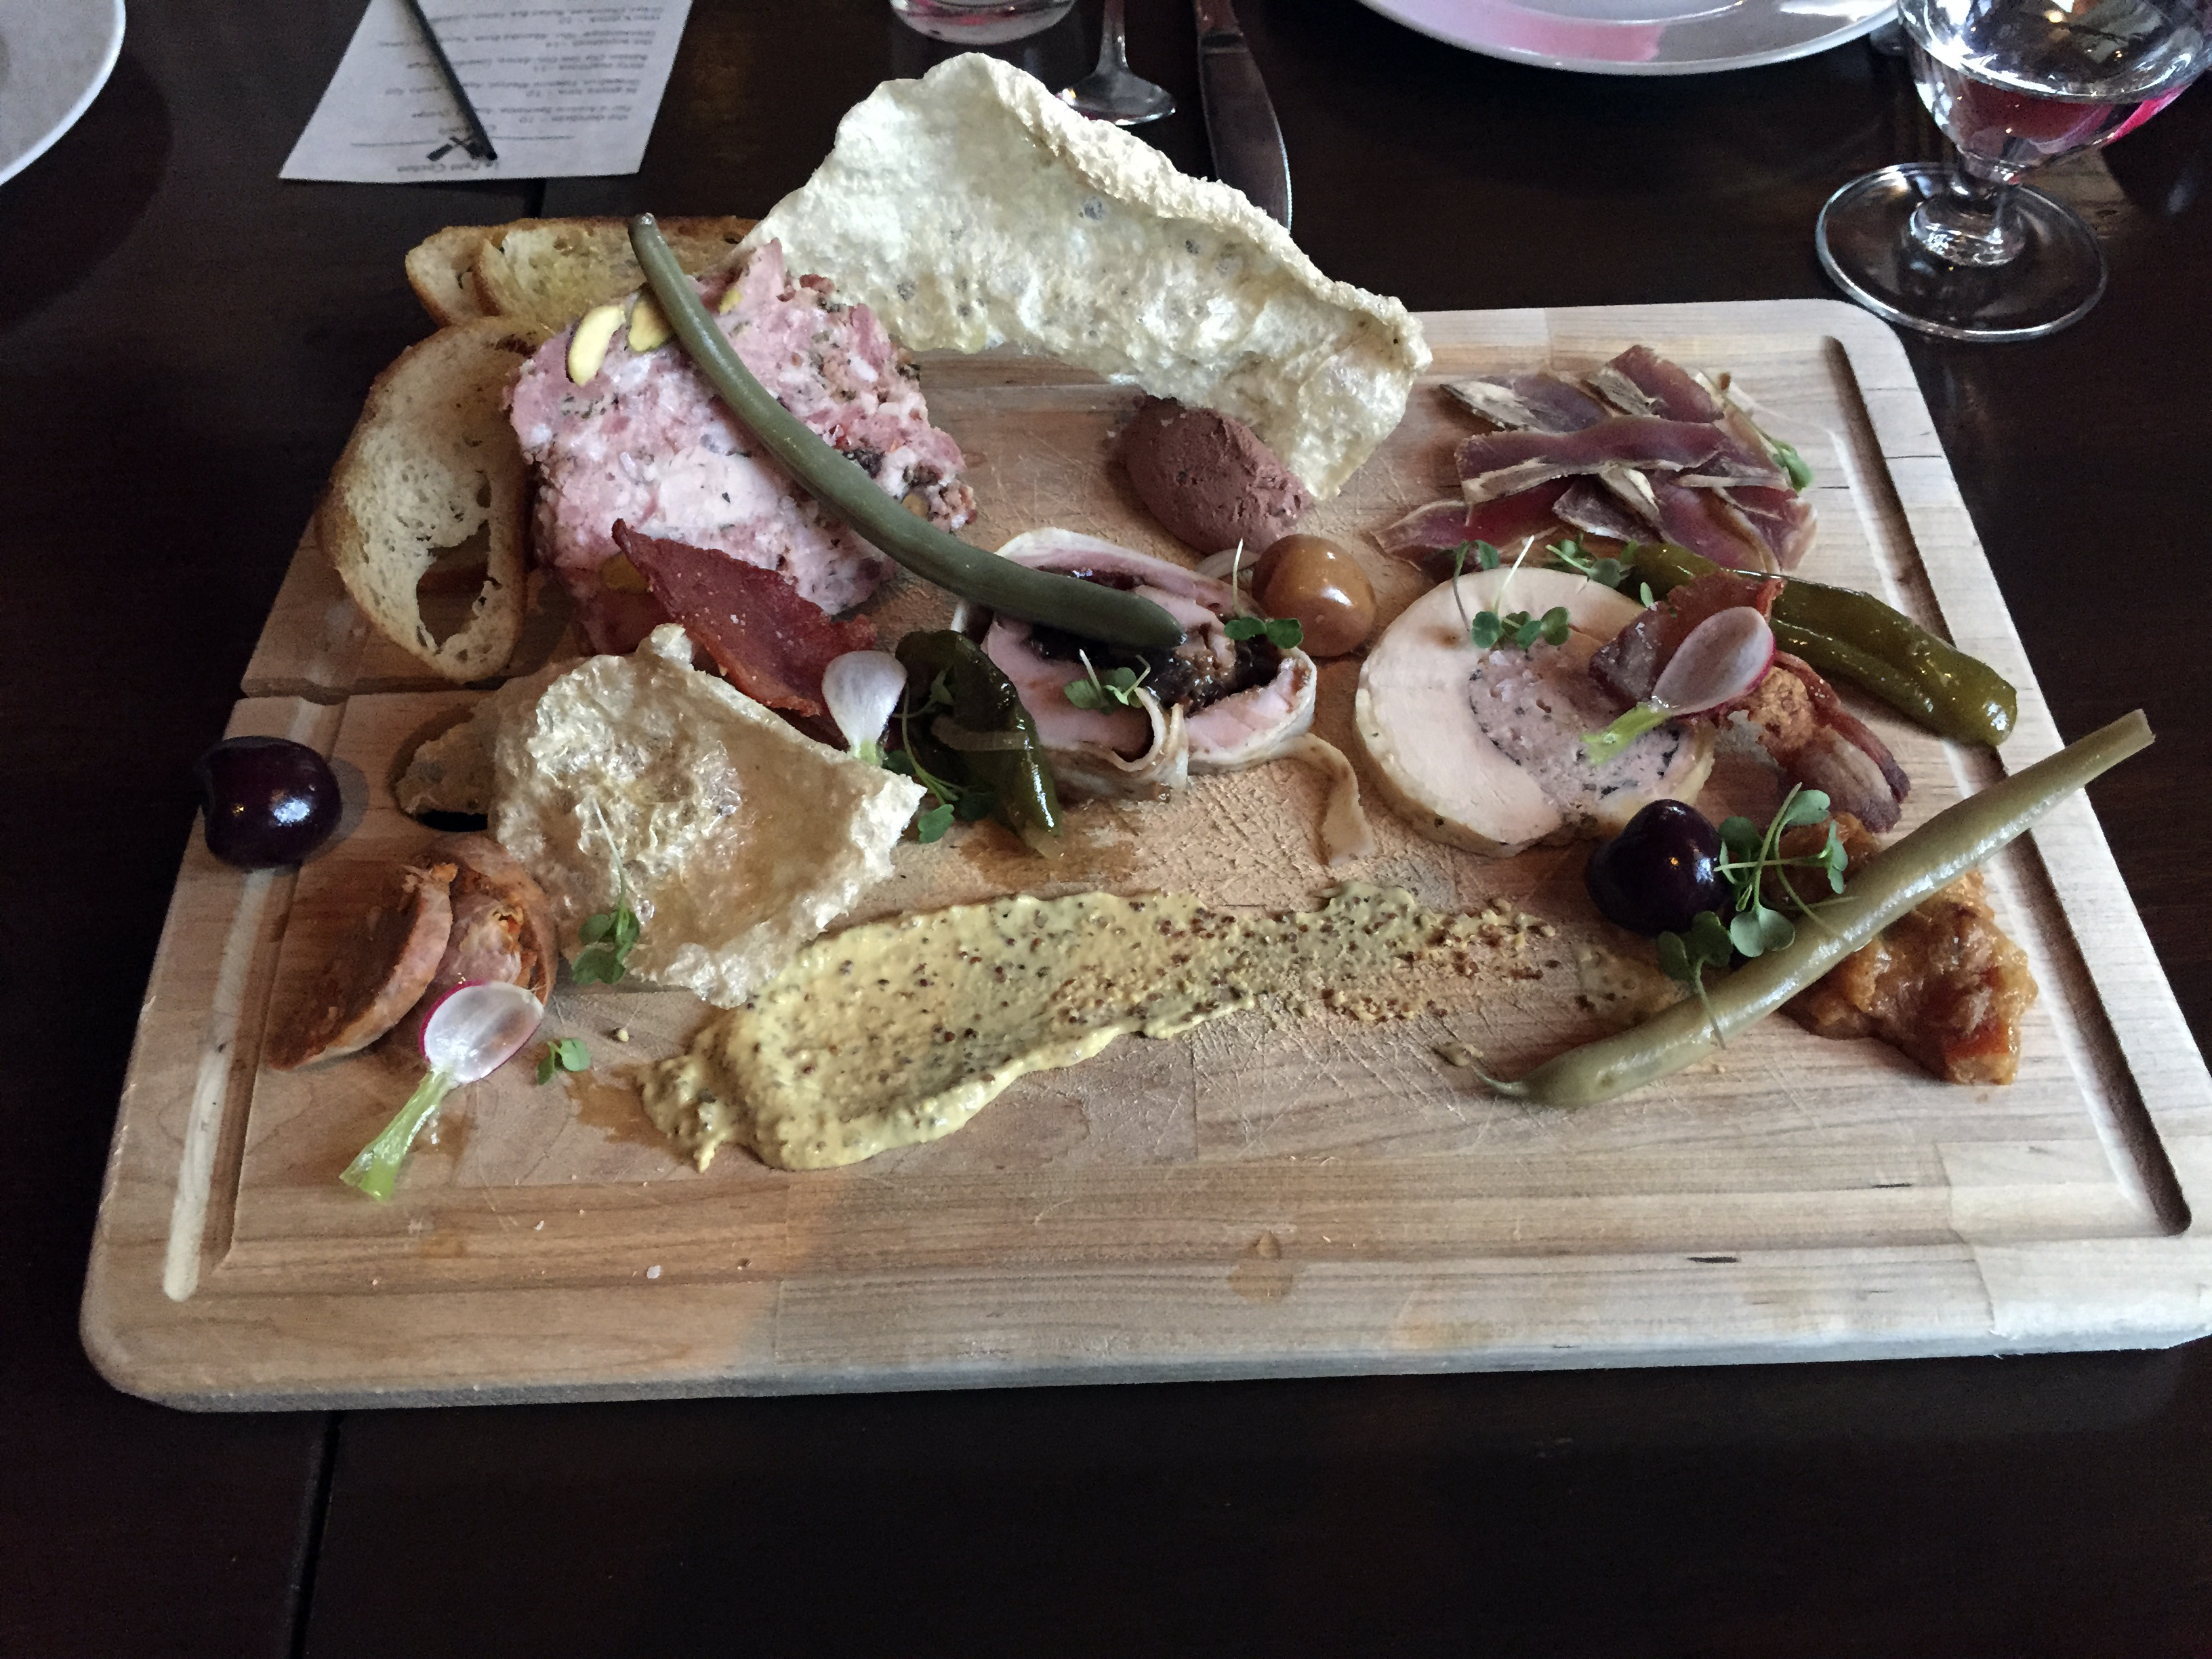 I remember a time when a charcuterie plate was something rare and